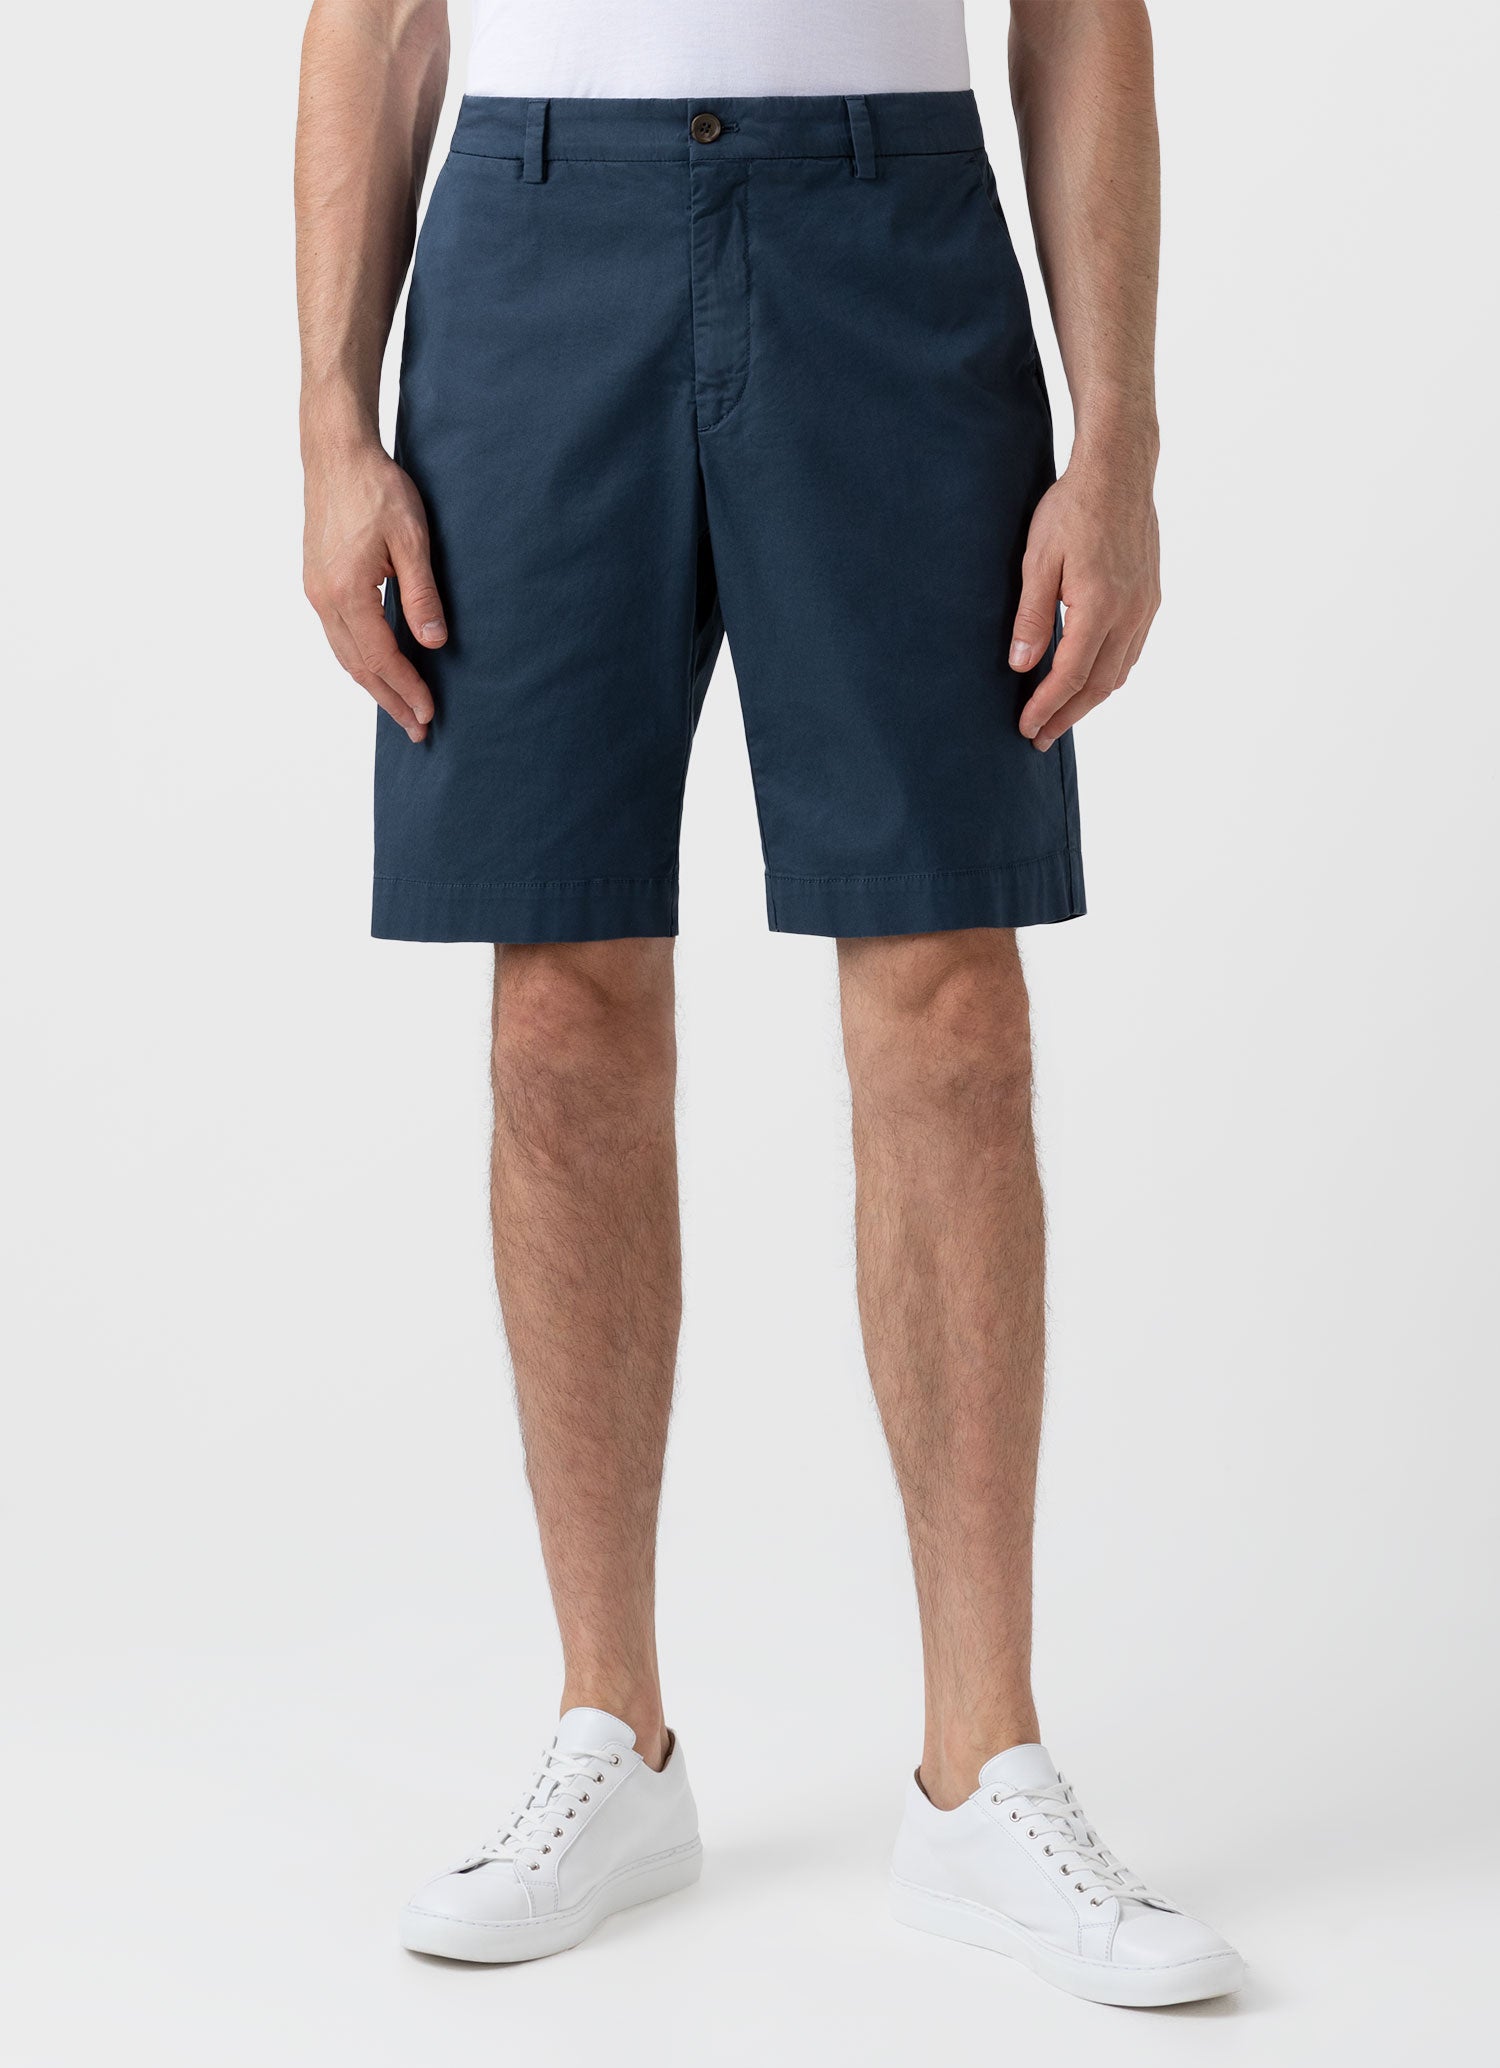 Men's Stretch Cotton Twill Chino Shorts in Shale Blue